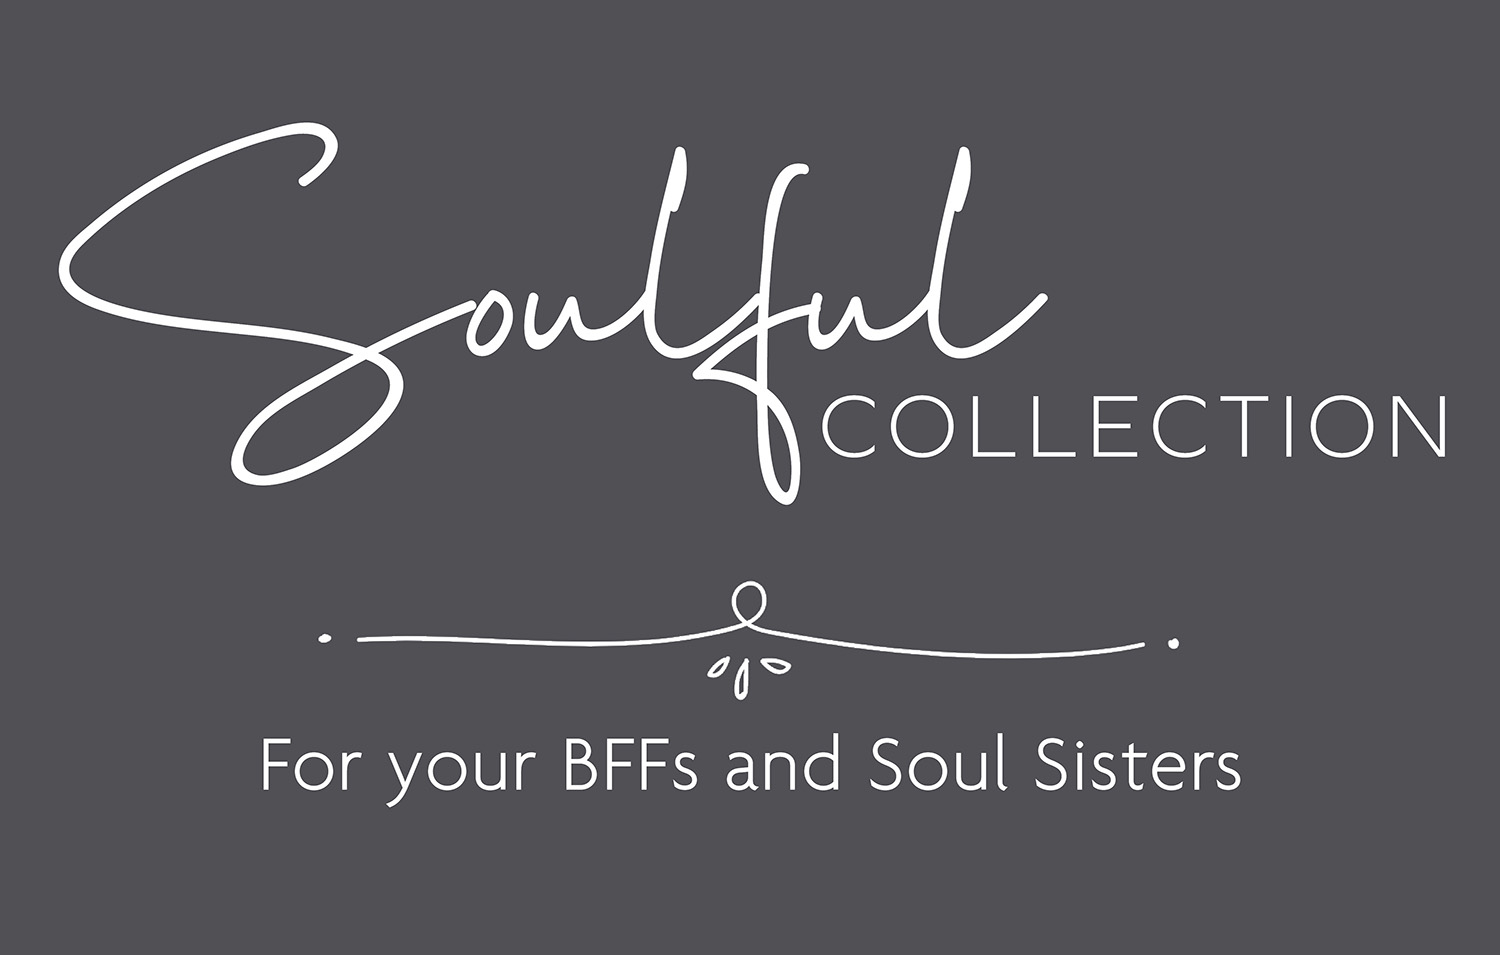 dark gray background with white letters that read, "Soulful Collection, for your BFFs and Soul Sisters."